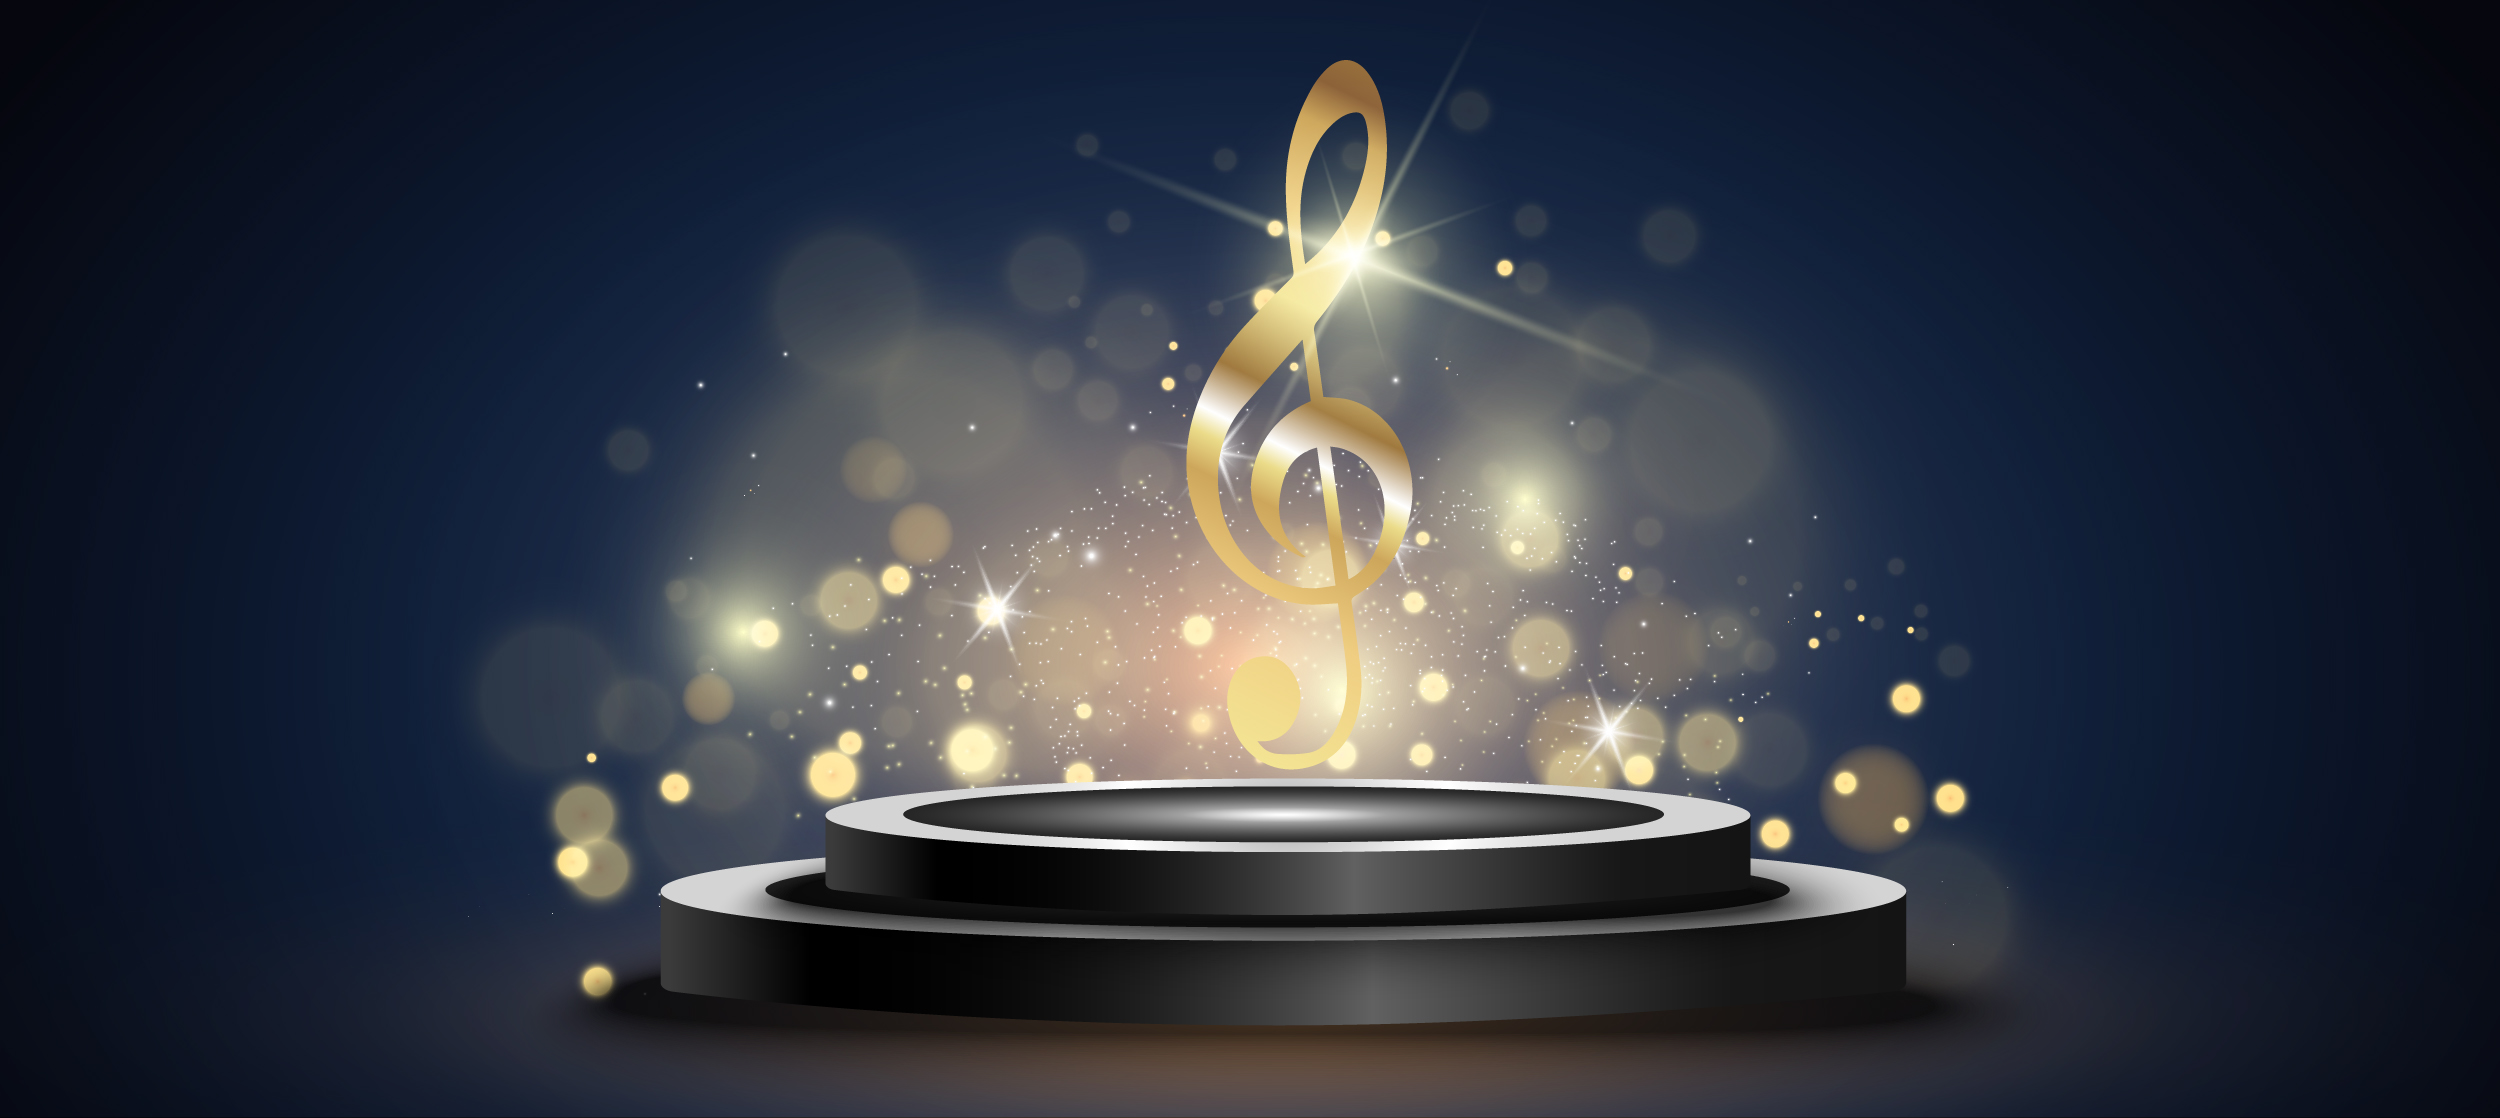 It’s the night of nights for artists across the globe as they vie for the most coveted spots at the Grammy Awards. Follow on as Bodog breaks down the movers and shakers for 2022.